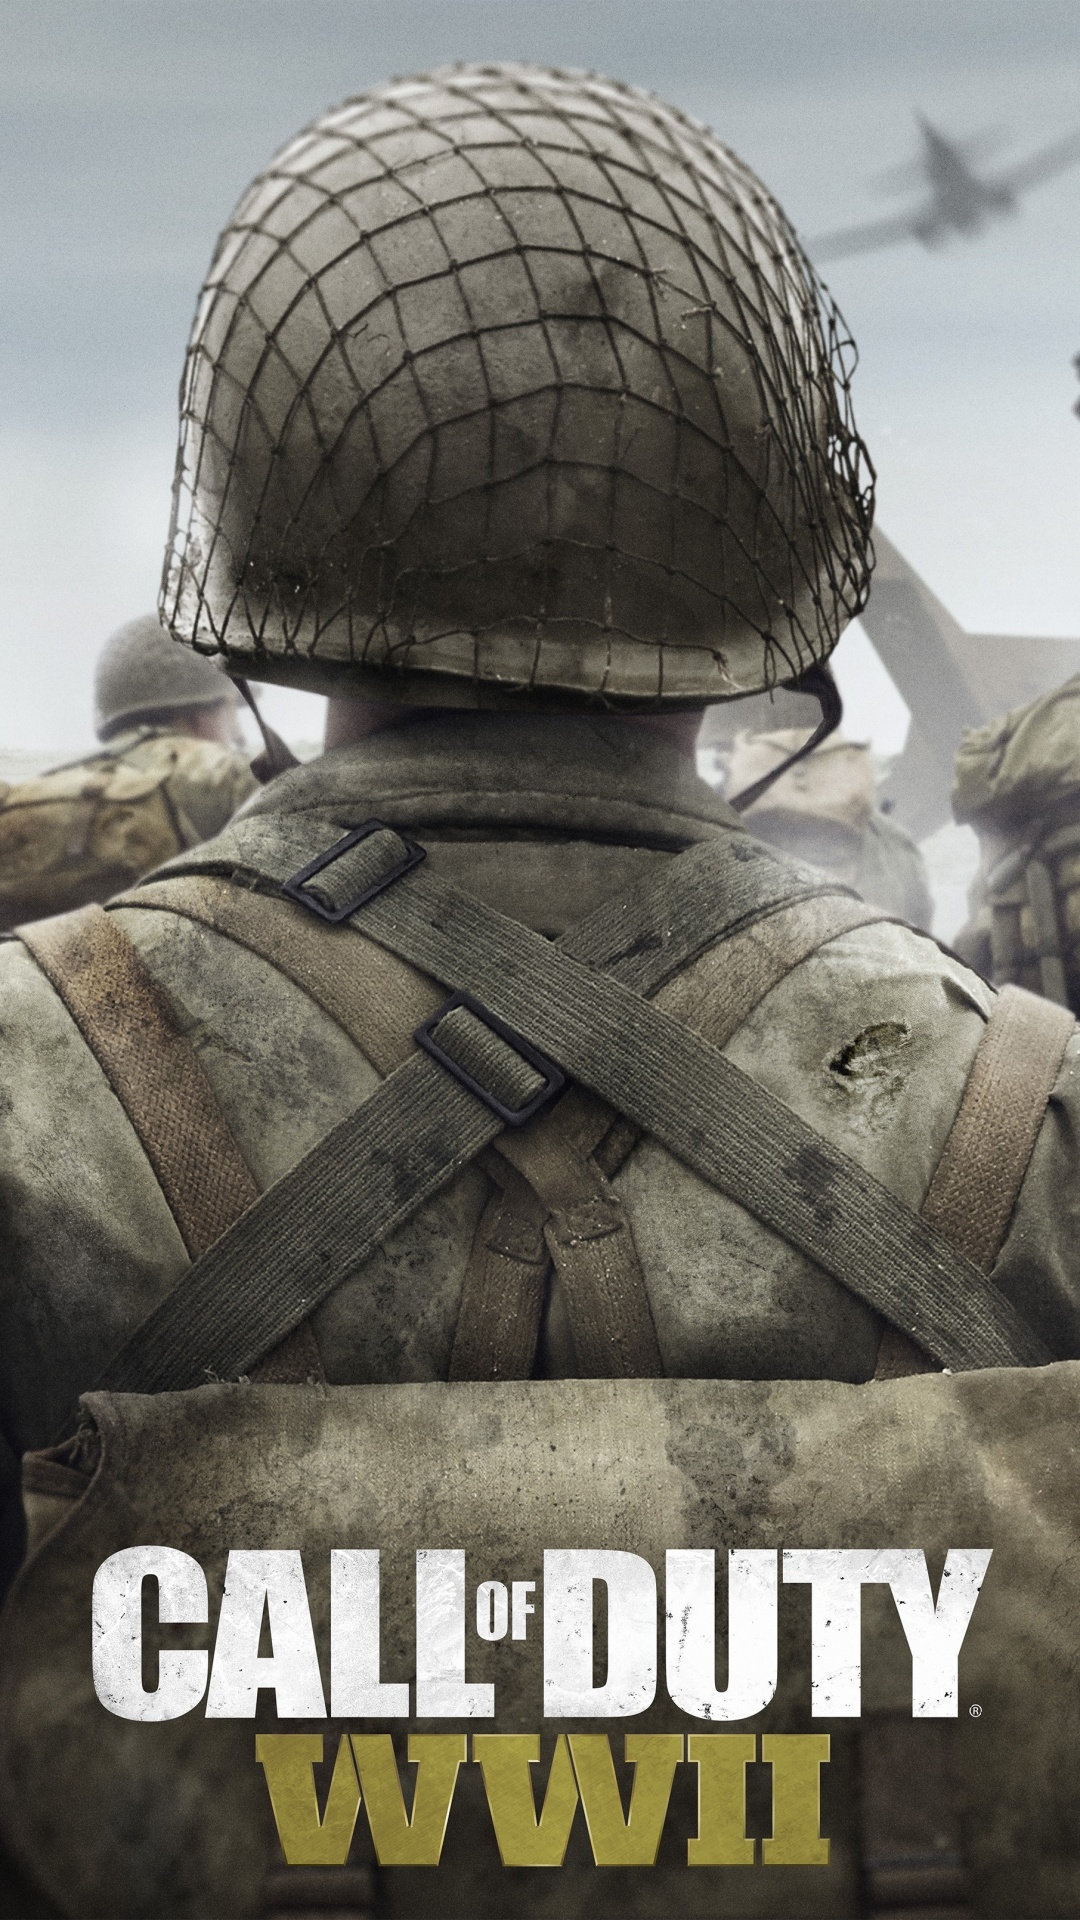 Call of Duty Ww2, Call of Duty WWII, Activision, Sledgehammer Games, Soldier. Wallpaper in 1080x1920 Resolution